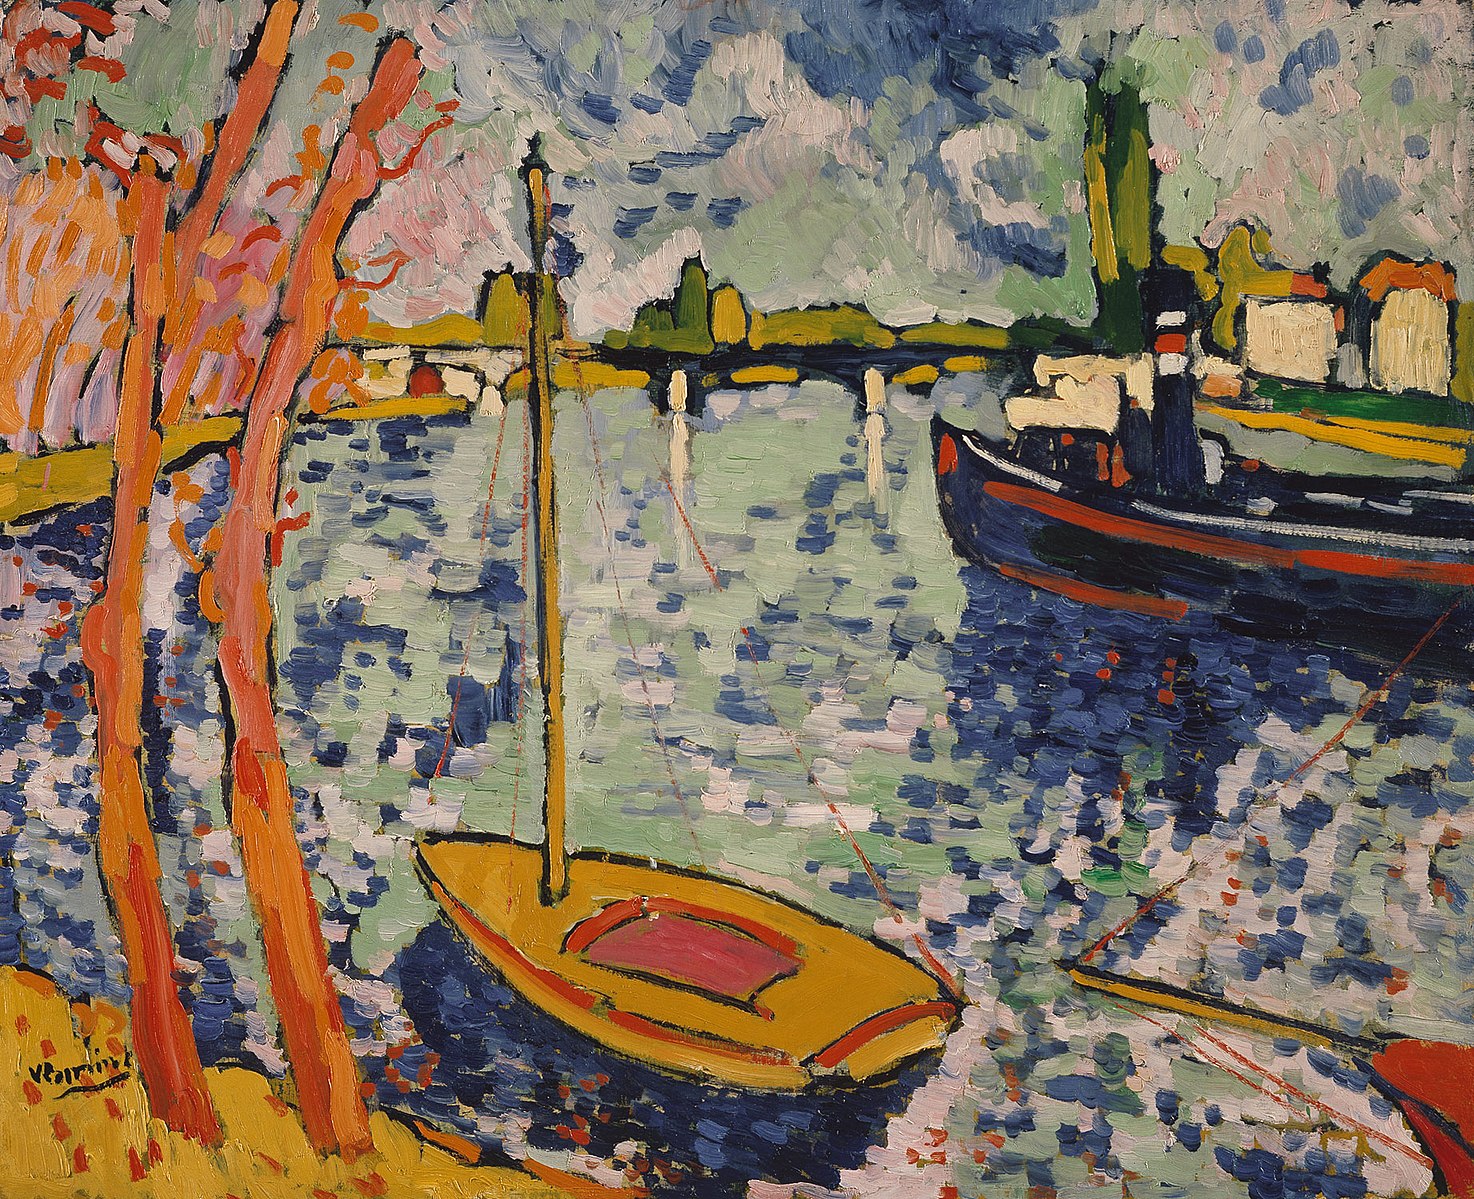 Several boats on a lake with trees and several buildings in the distance